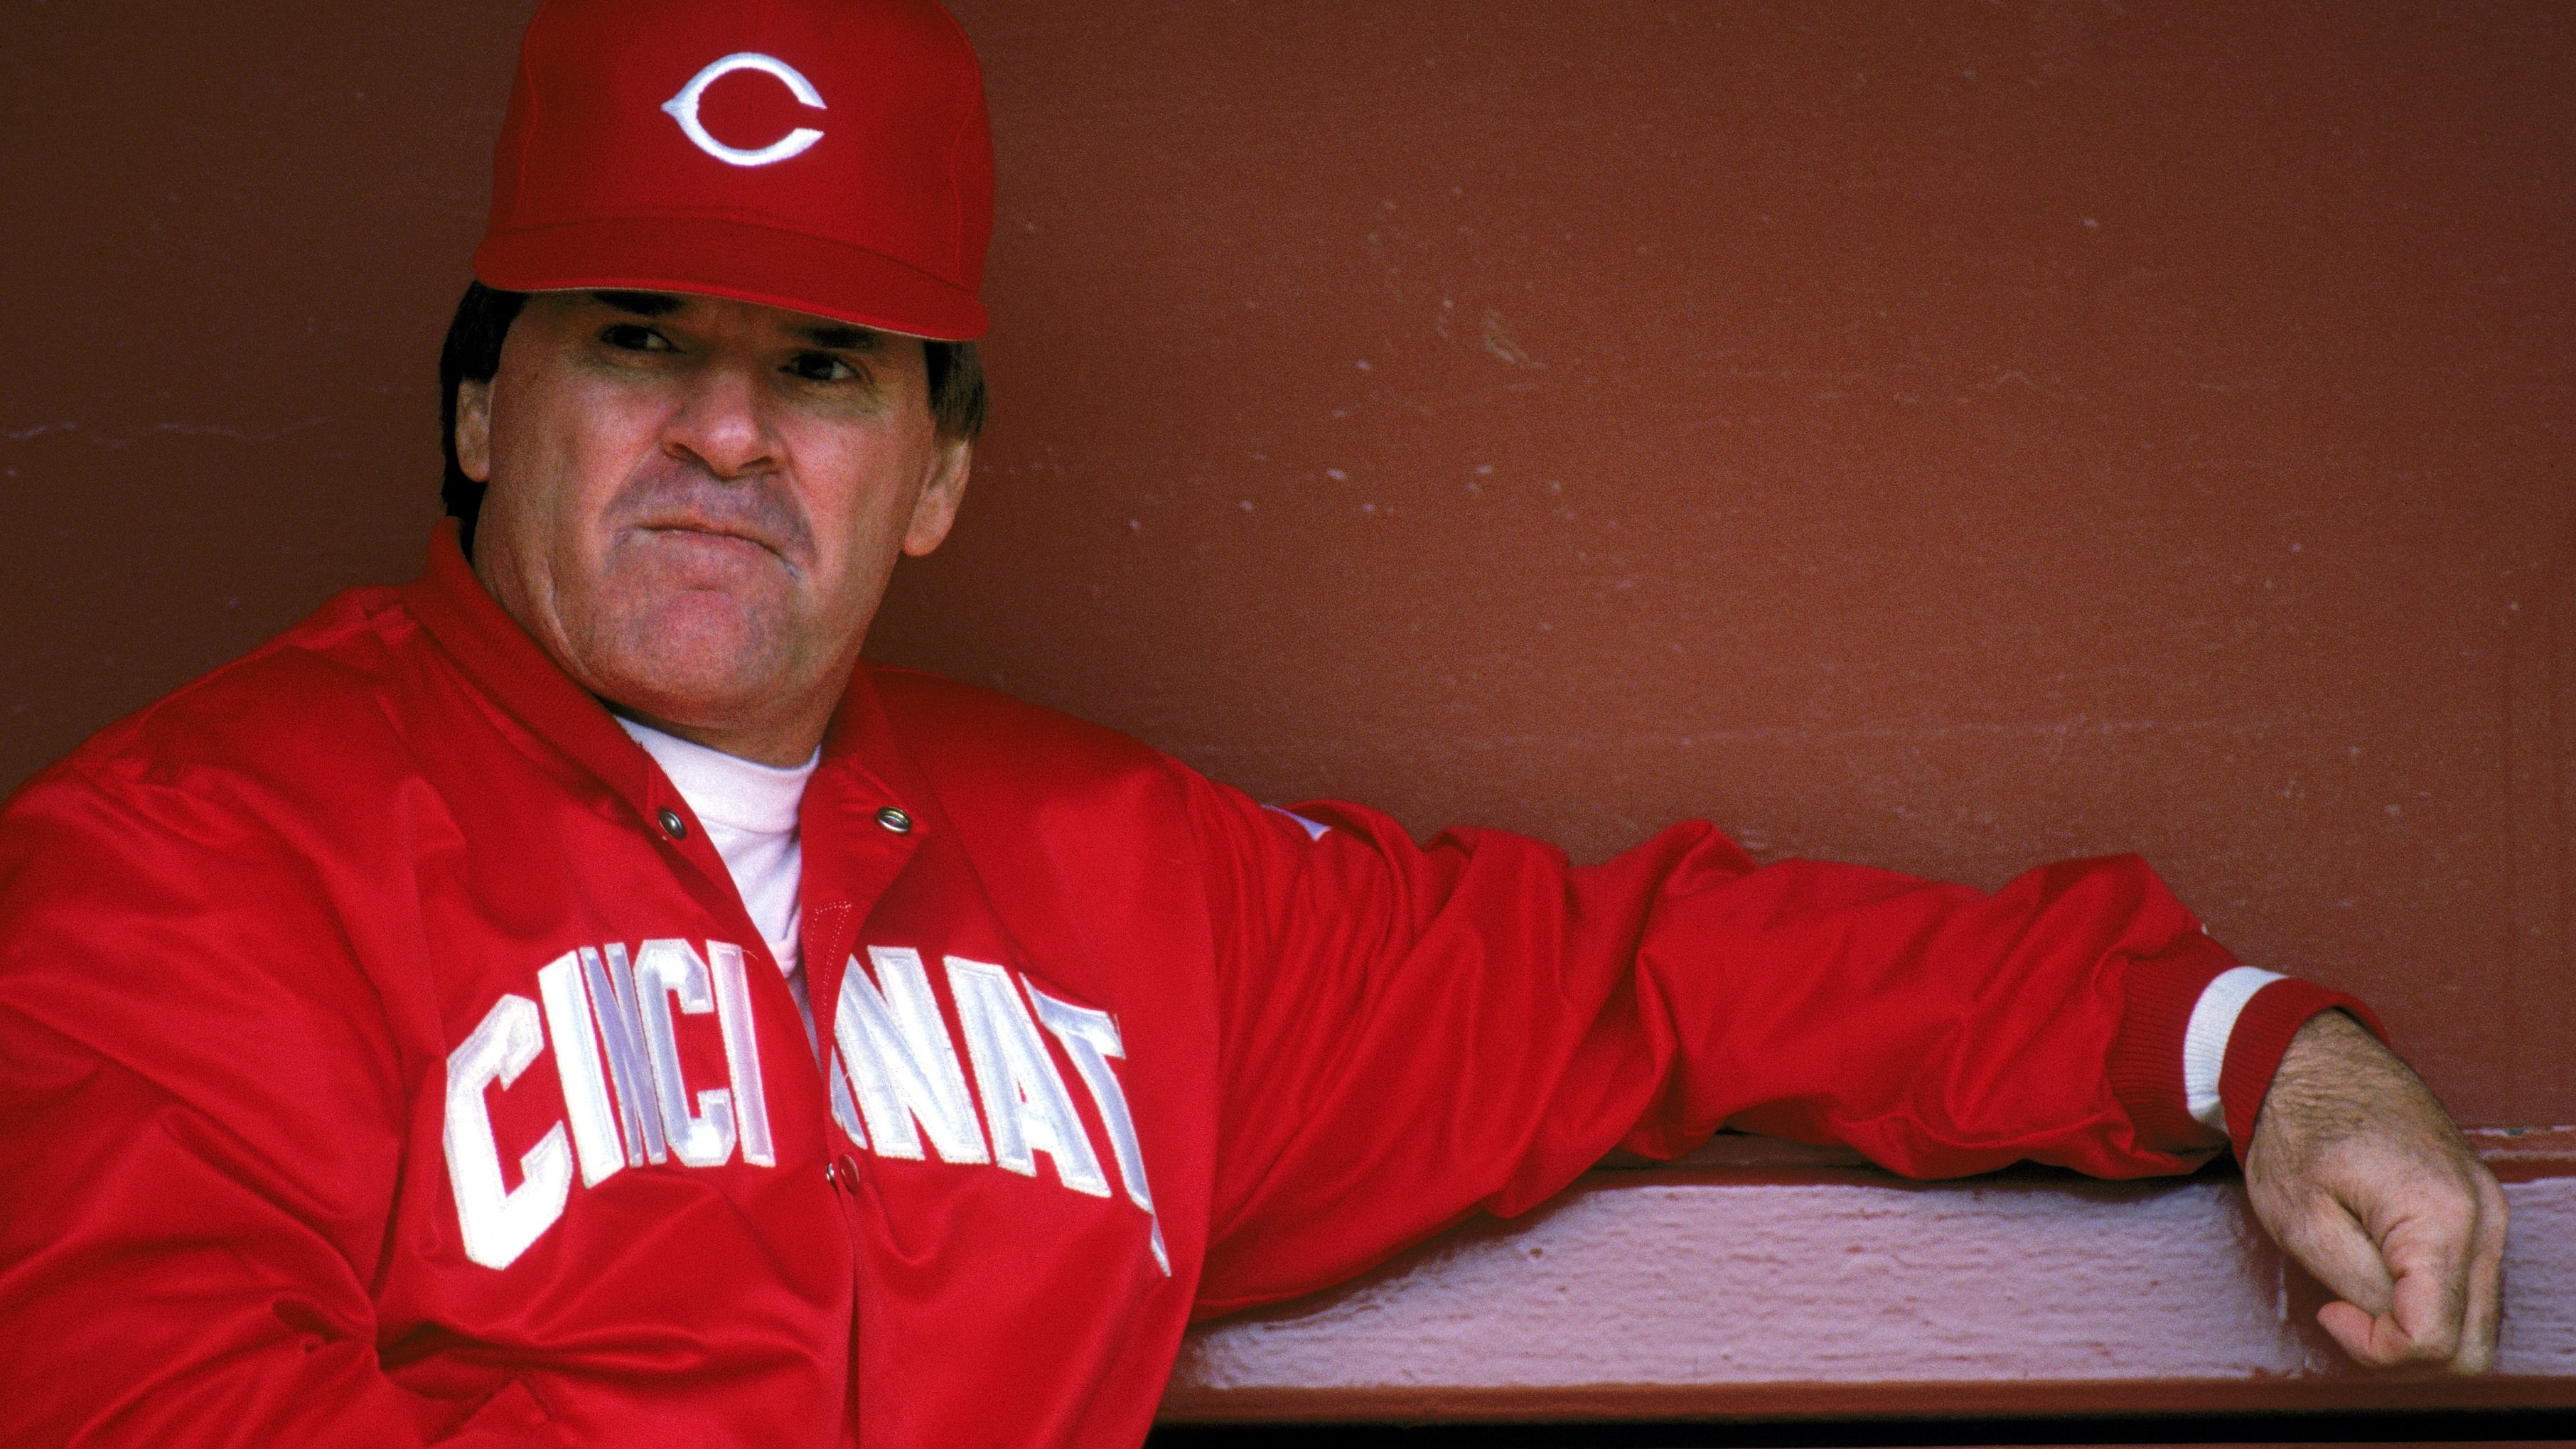 25 things you might not know about the 1990 Reds